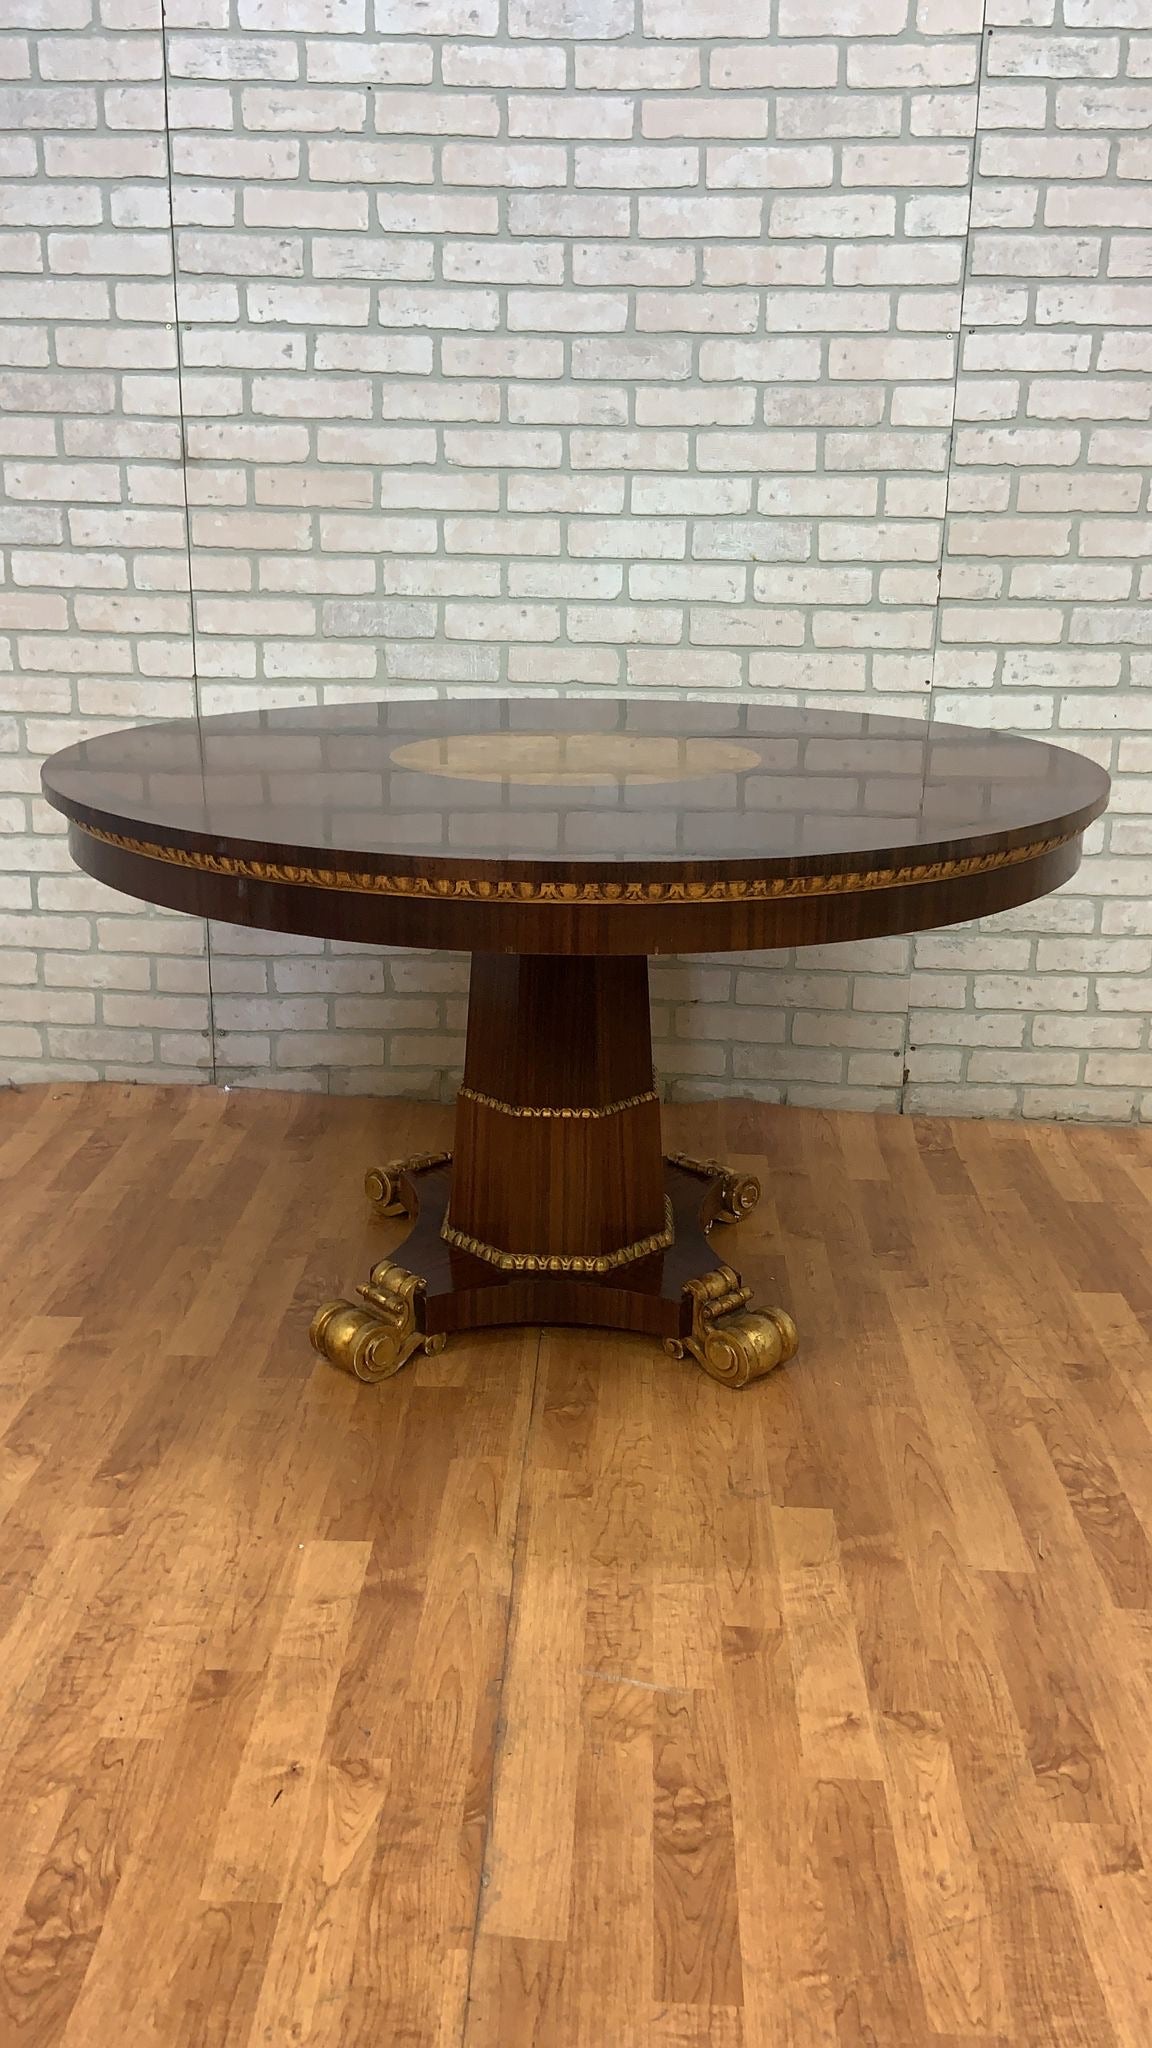 Antique French Empire Style Round Pedestal Table